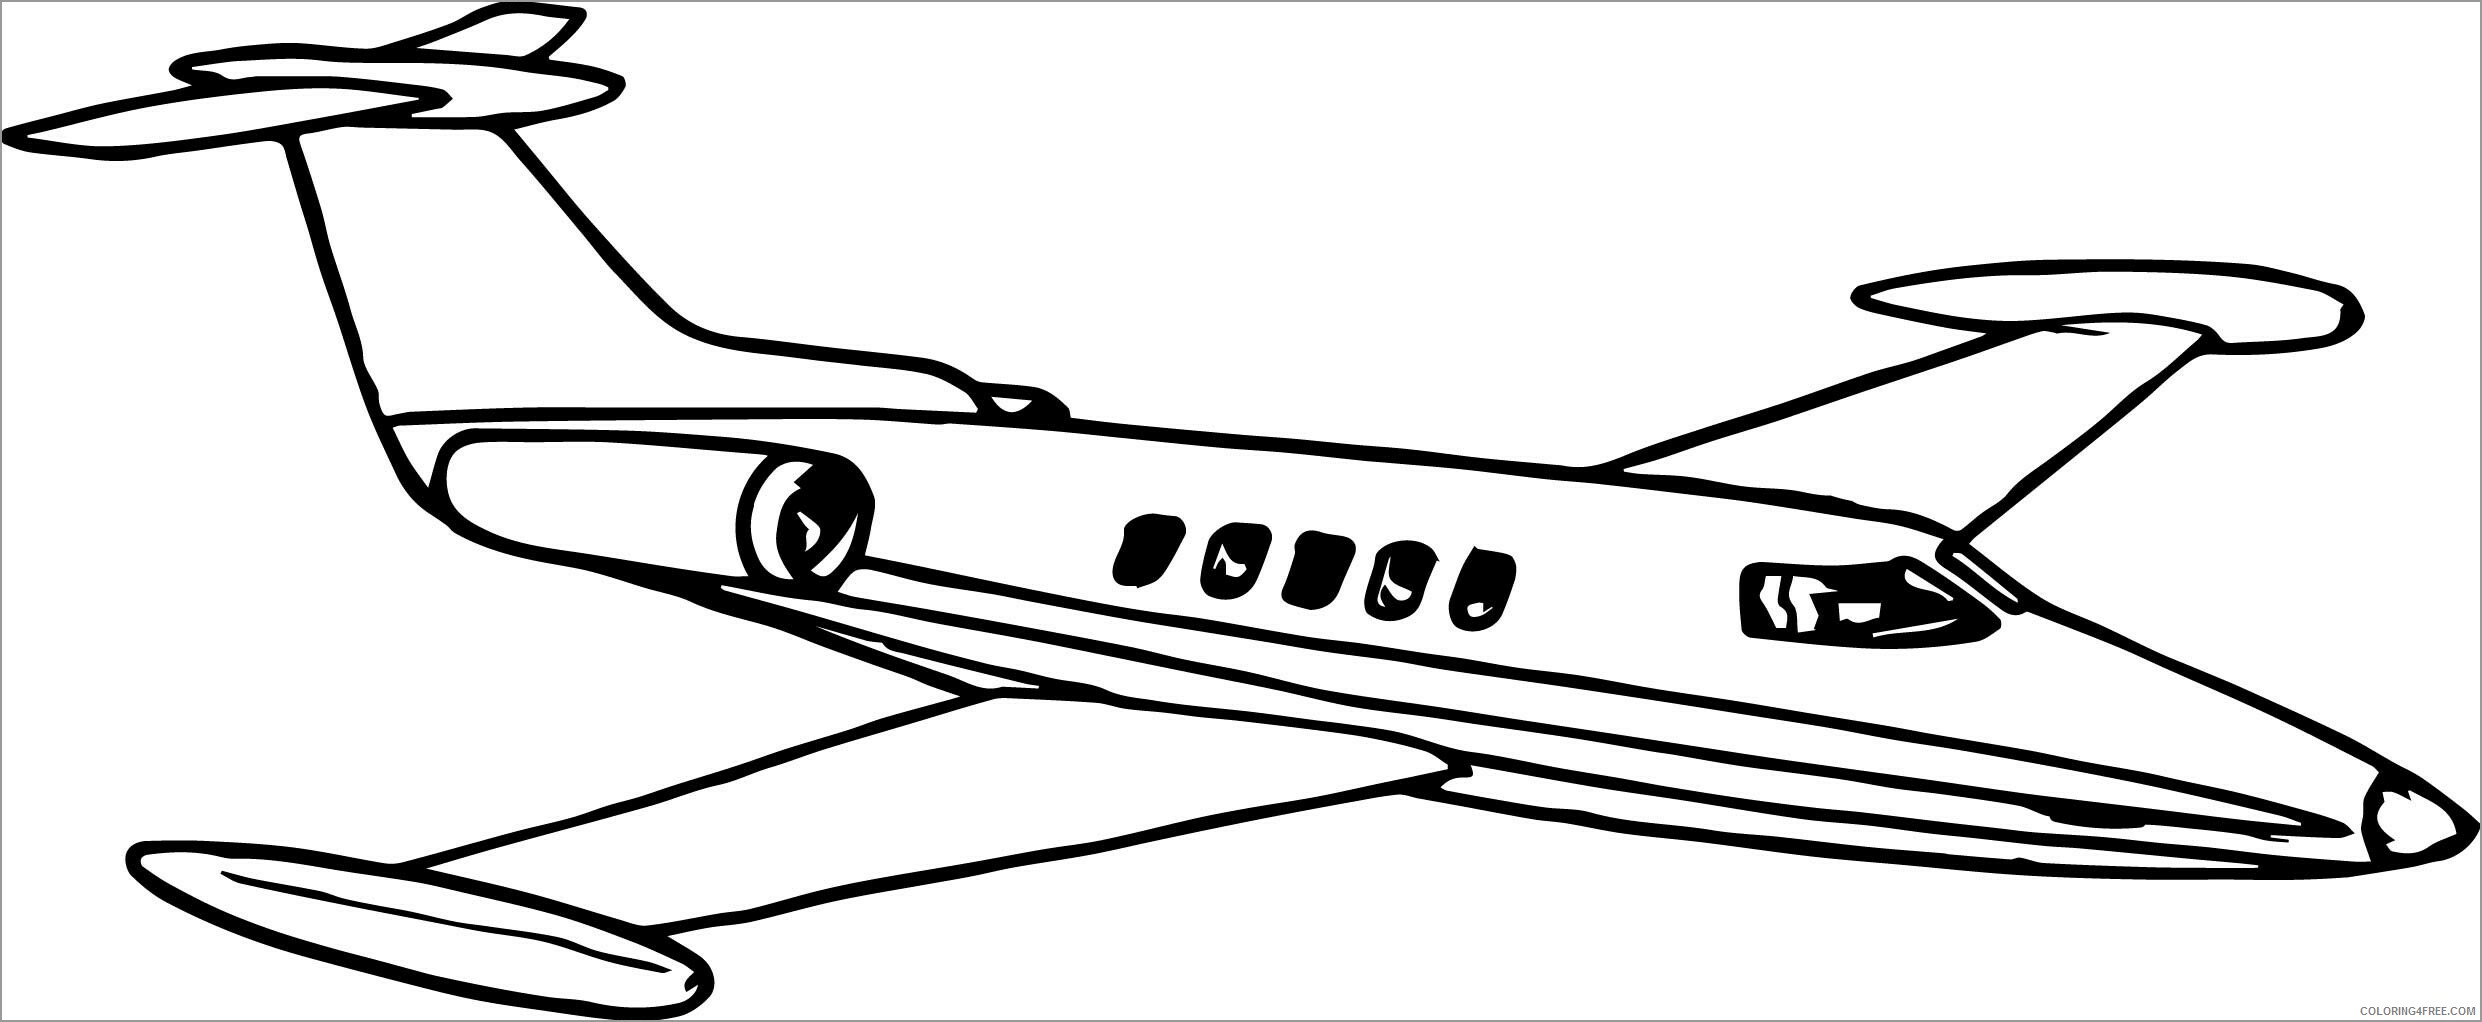 Jet Coloring Pages for boys printable jet airplane Printable 2020 0486 Coloring4free